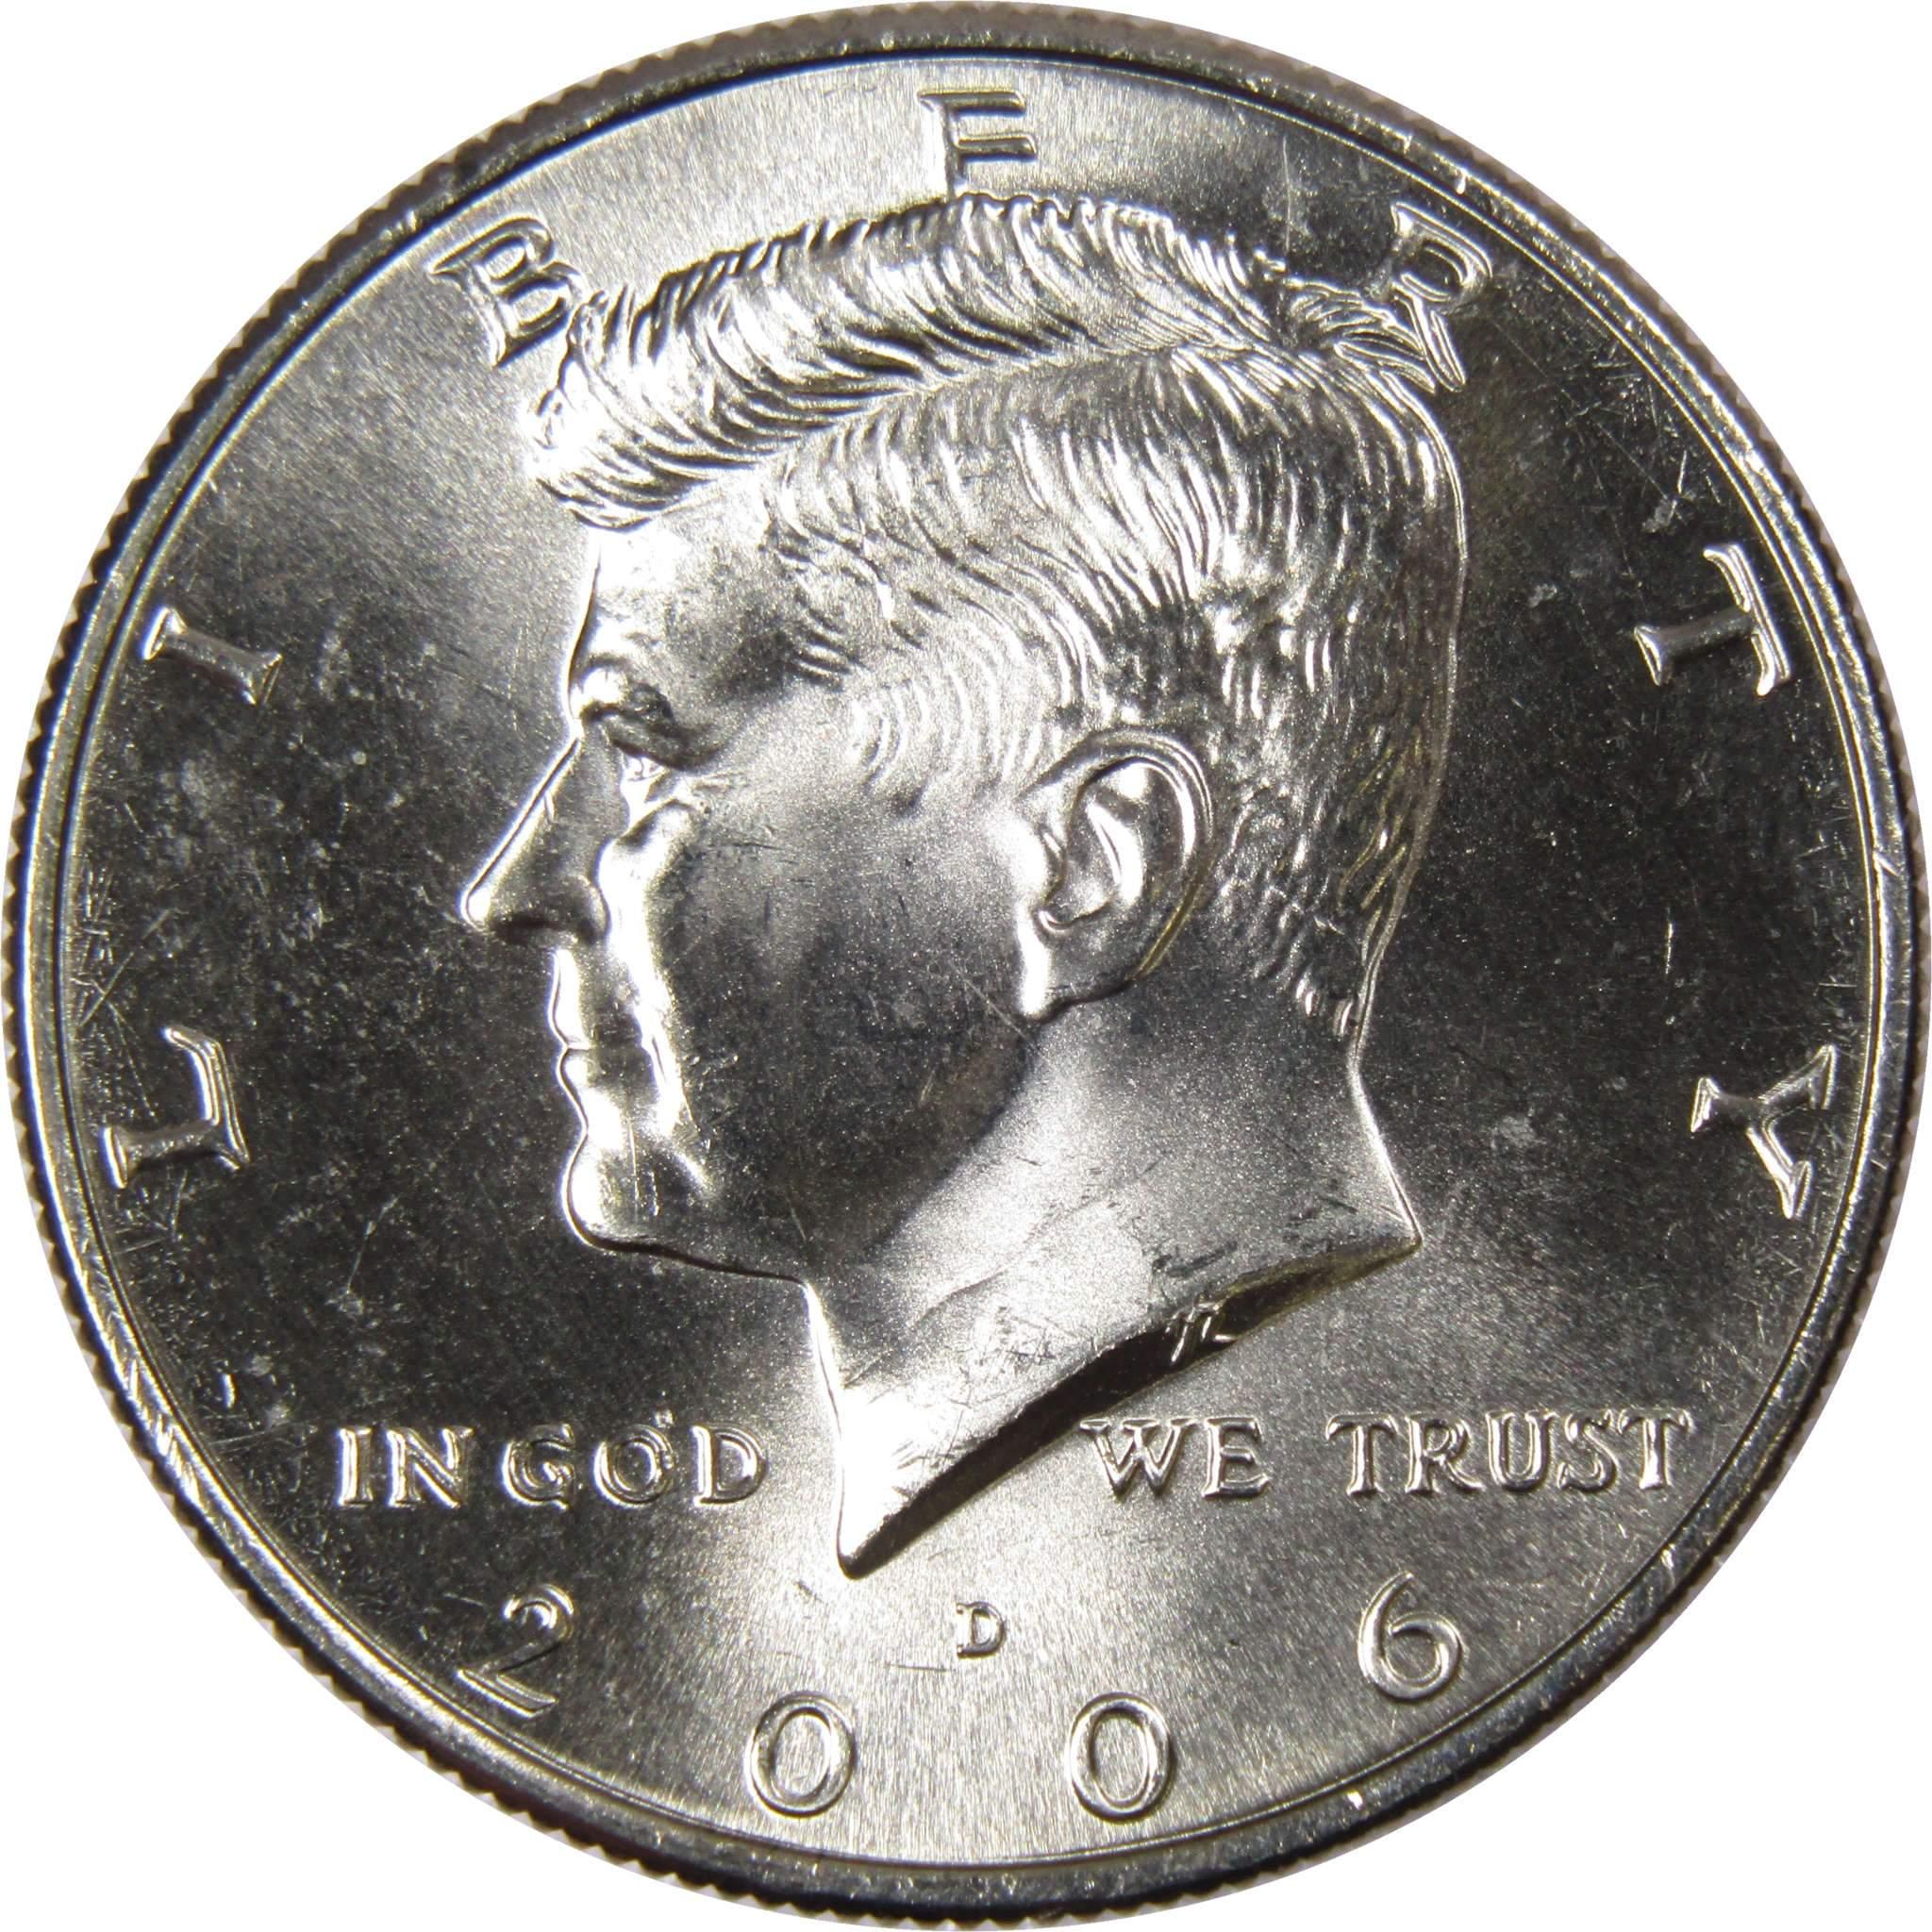 2006 D Kennedy Half Dollar BU Uncirculated Mint State 50c US Coin Collectible